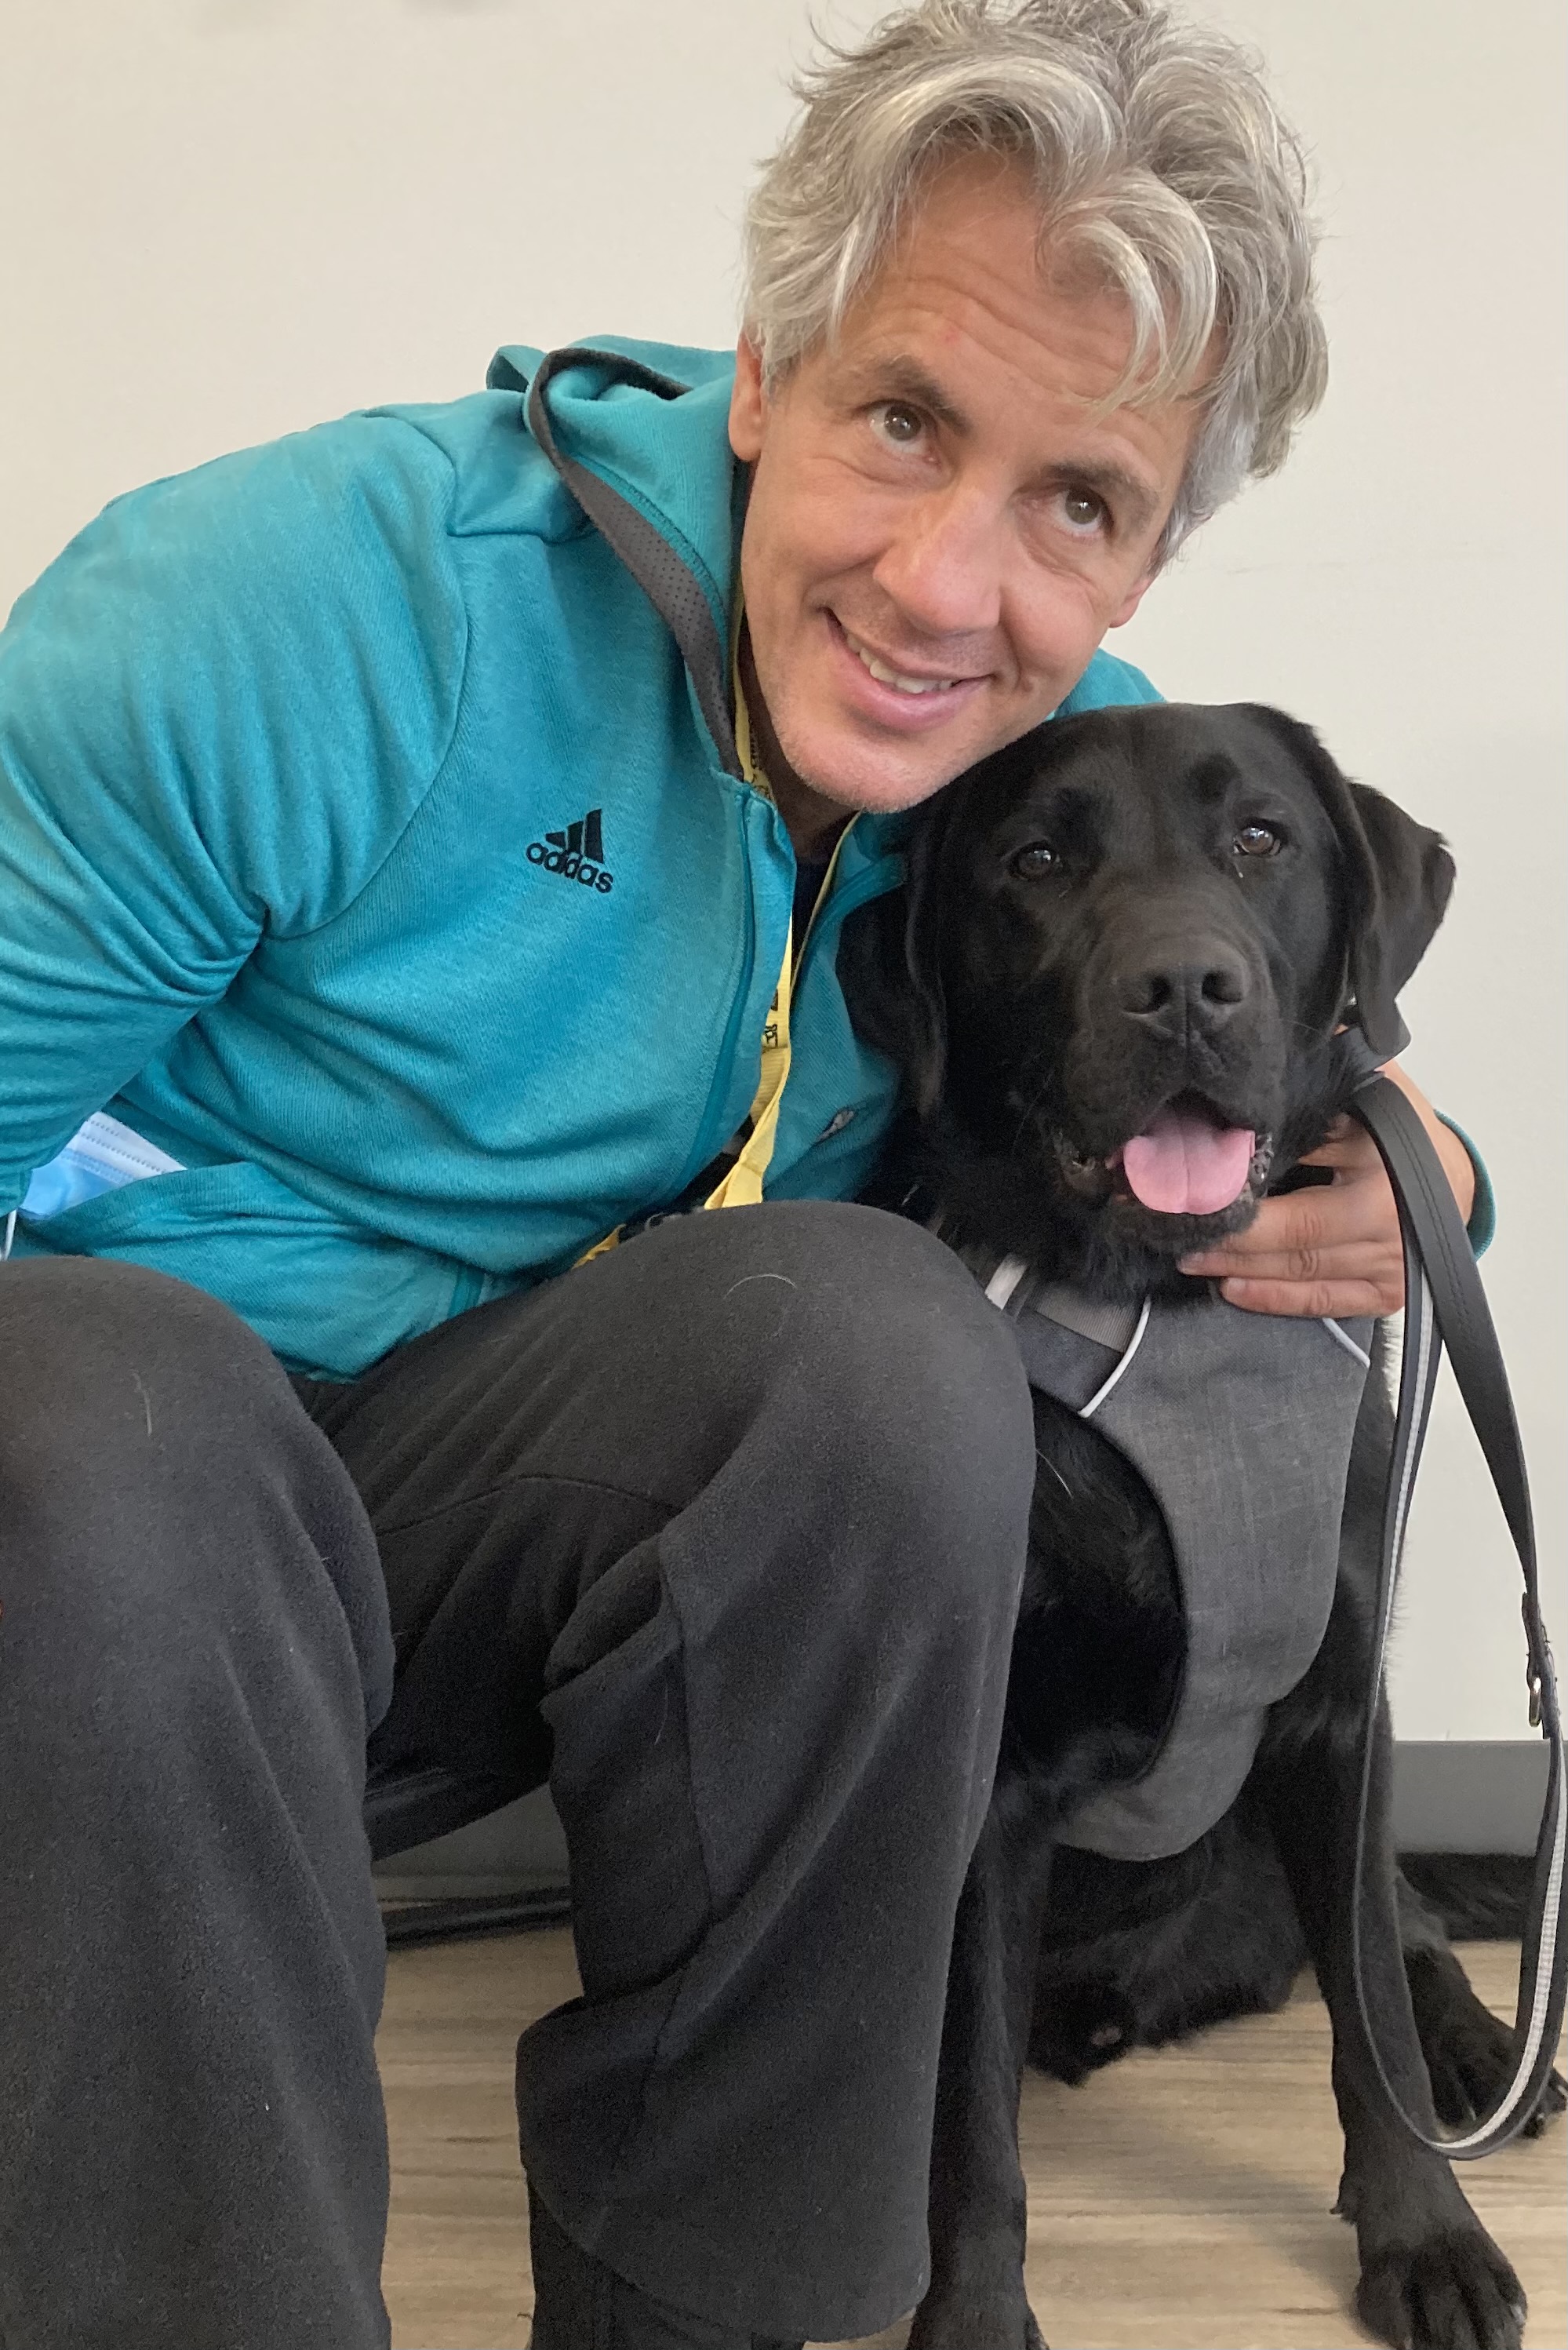 A picture of Ary wearing a turquoise Adidas jacket and black pants, sitting on the floor giving Don, a CNIB Guide Dog, a belly rub while smiling for the camera. To the right of the photo in white space, text reads: Humans with CNIB Guide Dogs – Ary & Don